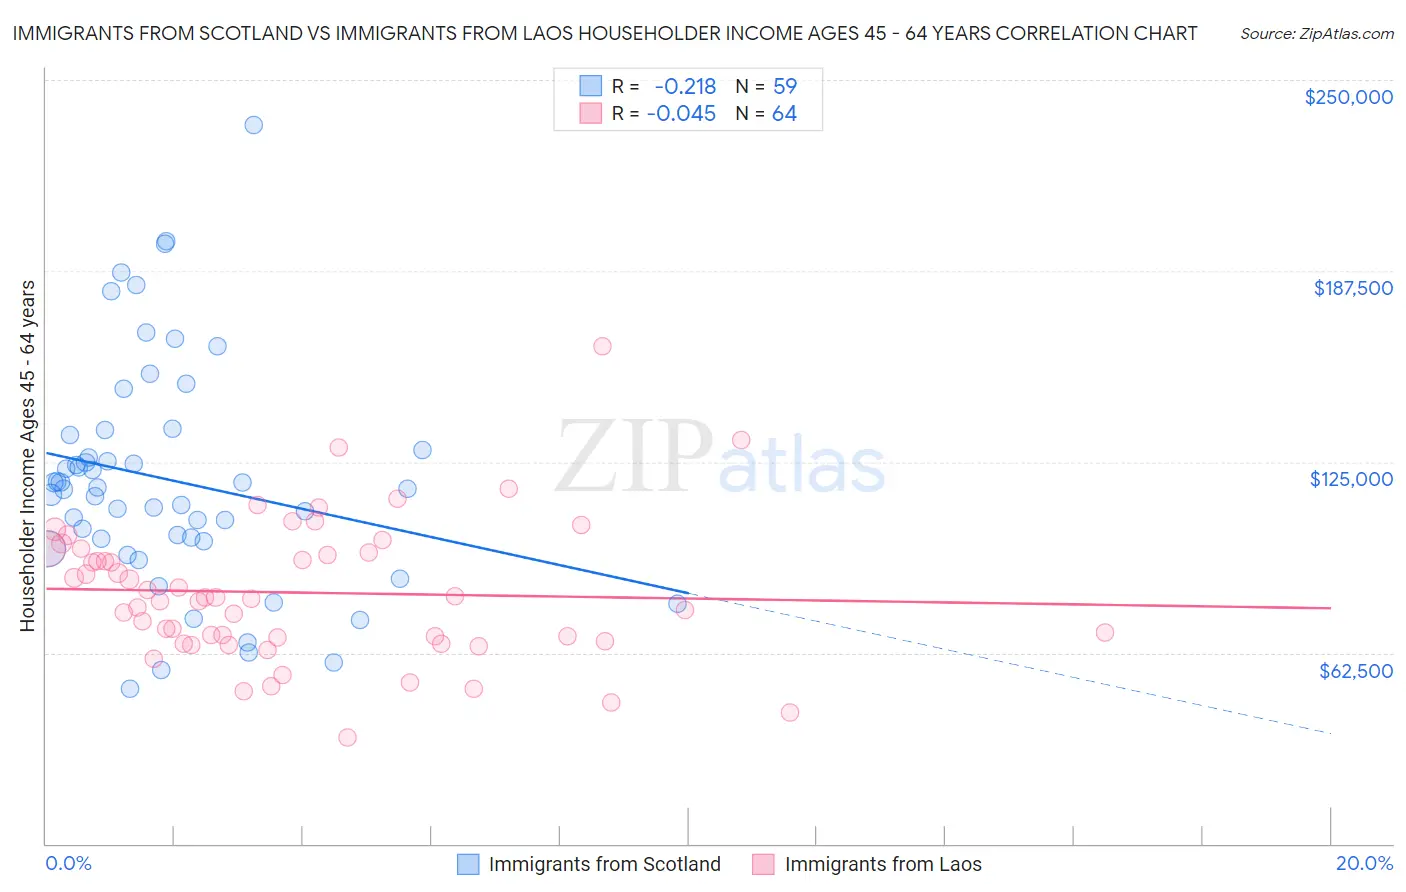 Immigrants from Scotland vs Immigrants from Laos Householder Income Ages 45 - 64 years